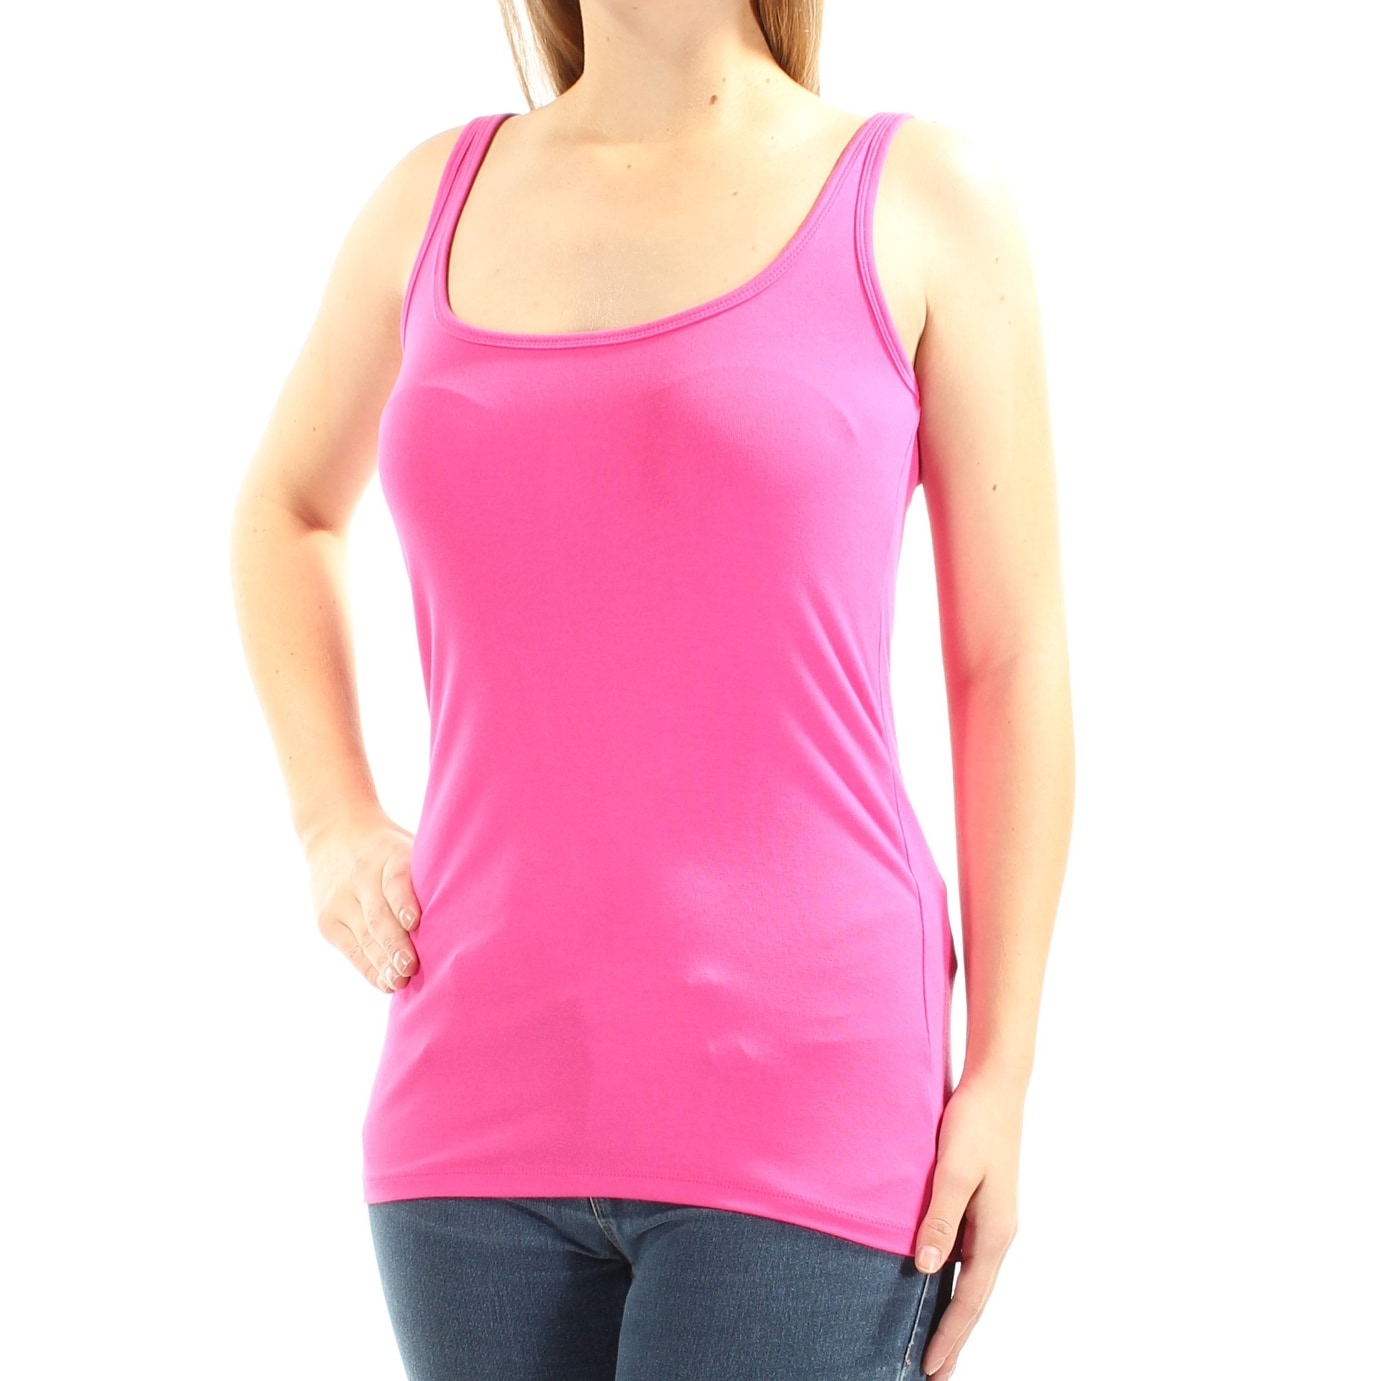 INC $29 Womens New 1663 Pink Square Neck Sleeveless Casual Top M B+B